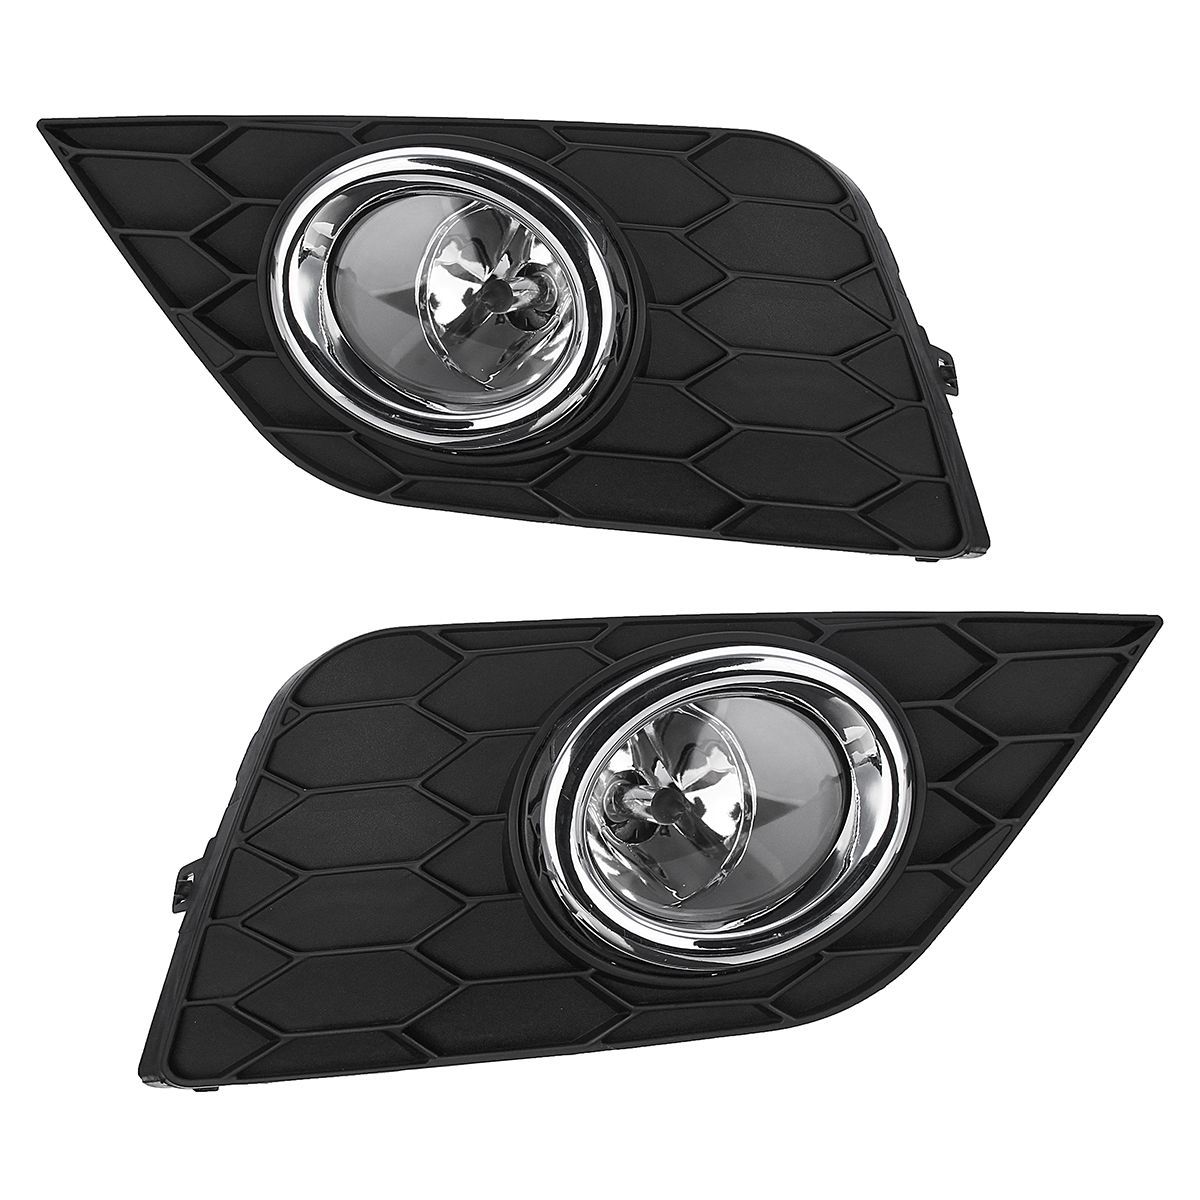 2Pcs-Car-Front-Bumper-Fog-Light-LampGrilles-with-Harness-For-Nissan-Sentra-2017-2019-1679406